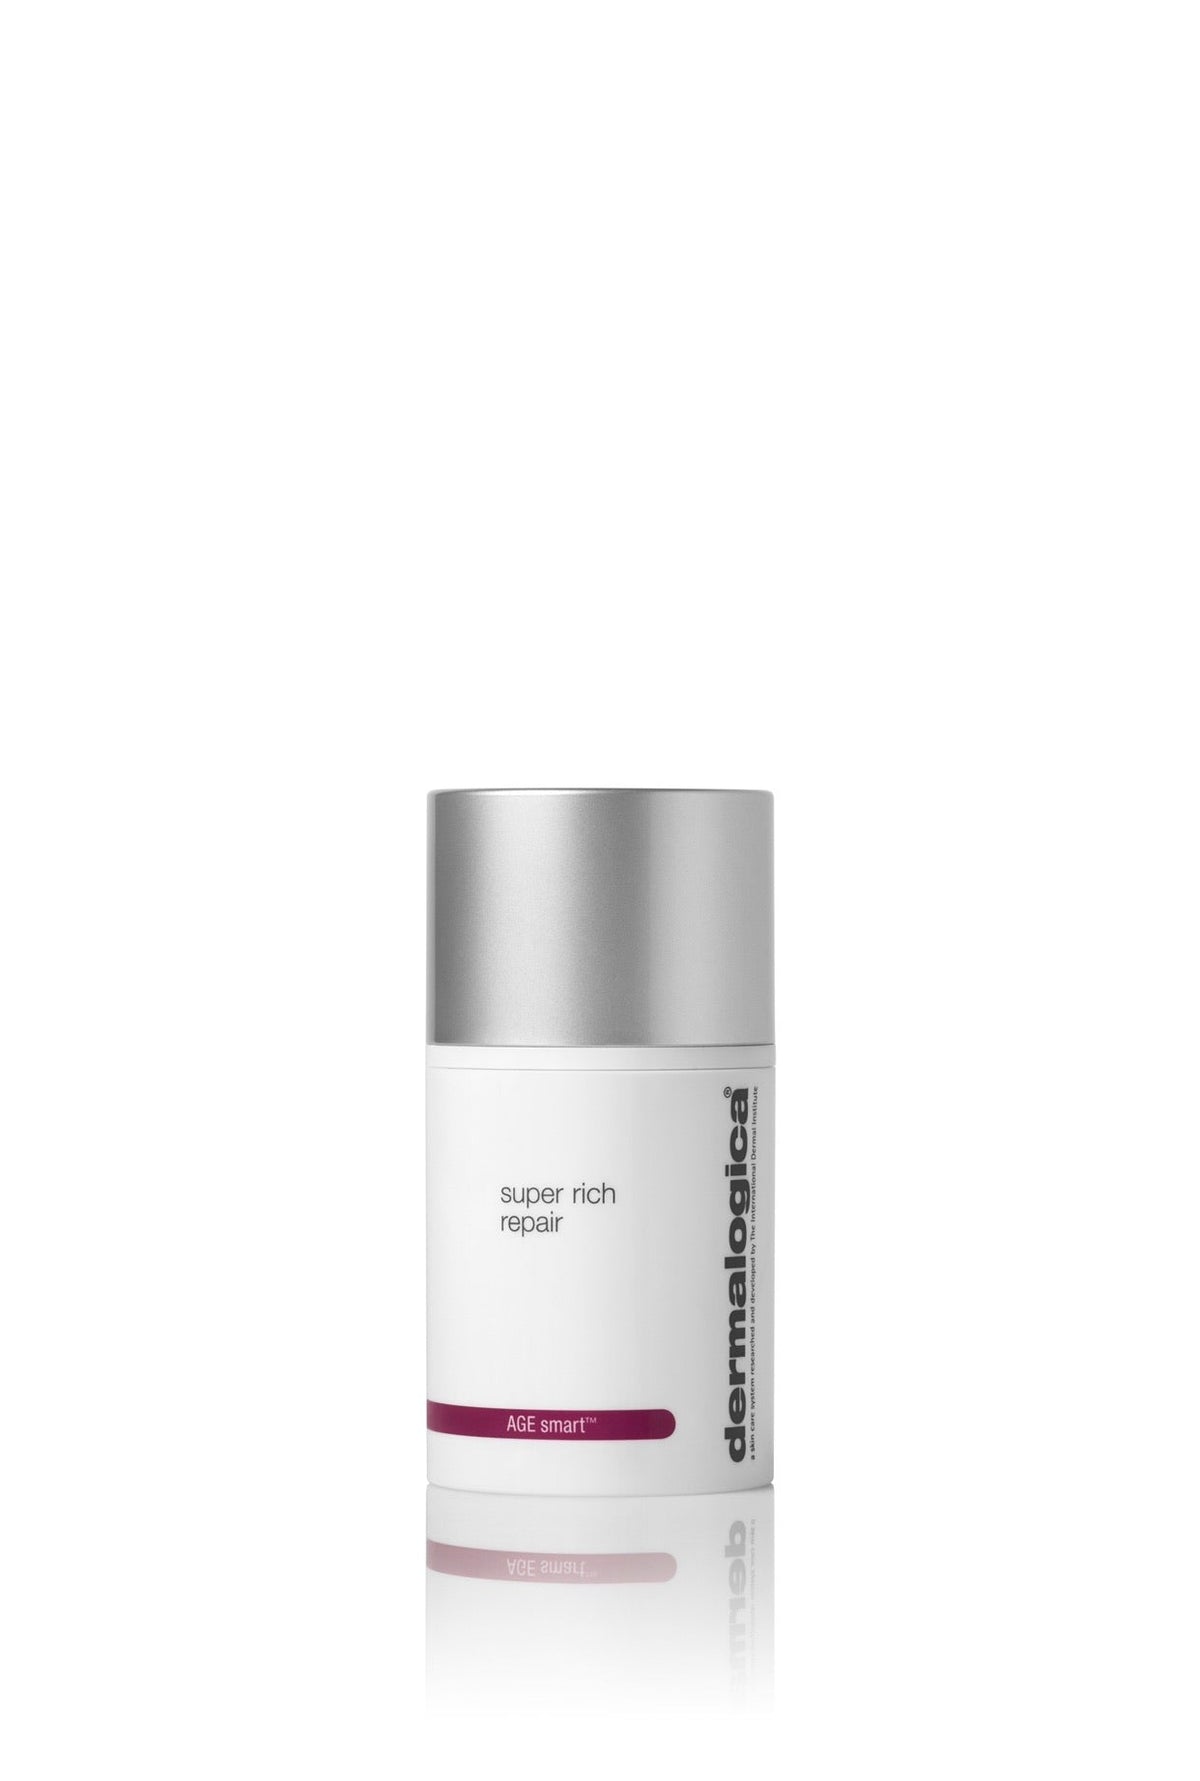 AGE Recovery – Reborn Skinstore